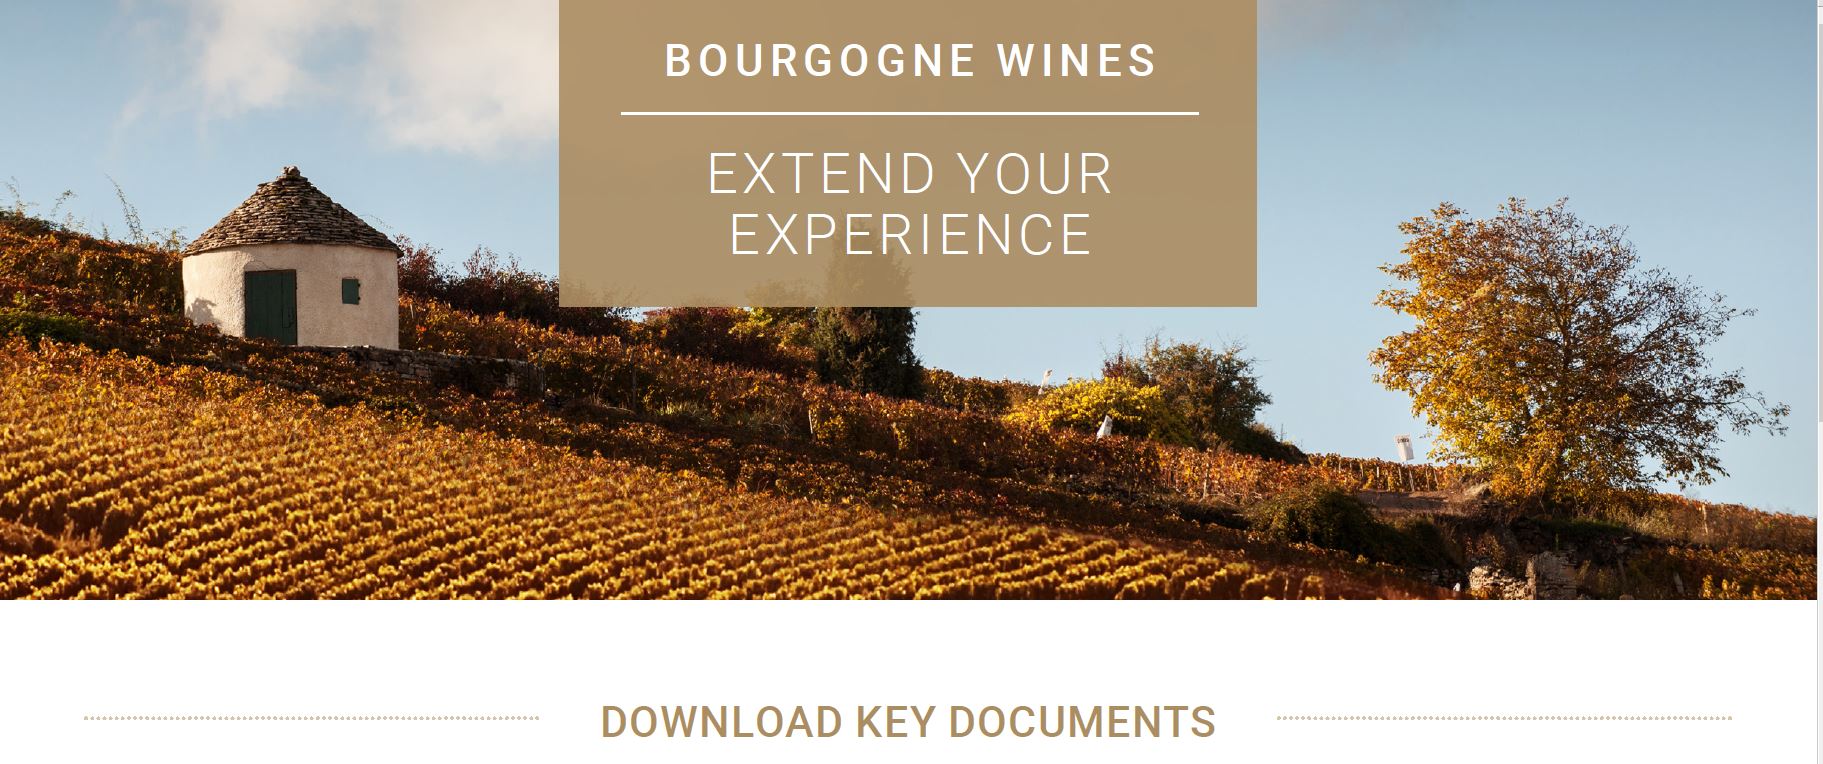 Are you looking for information about Bourgogne wines?